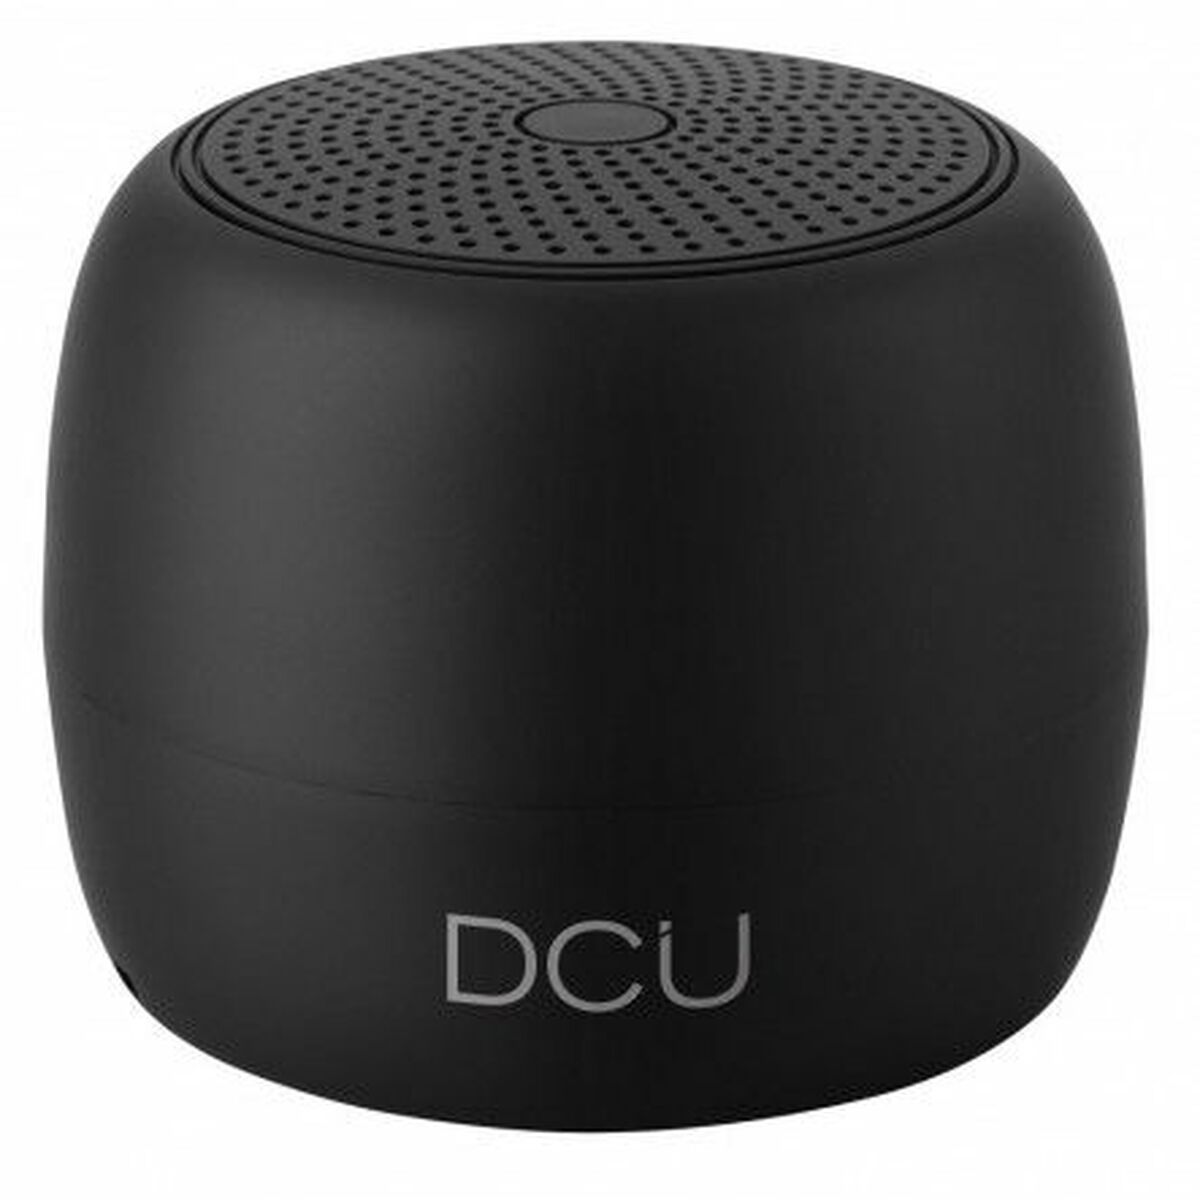 Portable Bluetooth Speakers DCU MINI, DCU Tecnologic, Electronics, Mobile communication and accessories, portable-bluetooth-speakers-dcu-mini, Brand_DCU Tecnologic, category-reference-2609, category-reference-2882, category-reference-2923, category-reference-t-19653, category-reference-t-21311, category-reference-t-25527, category-reference-t-4036, category-reference-t-4037, Condition_NEW, entertainment, music, Price_20 - 50, telephones & tablets, wifi y bluetooth, RiotNook